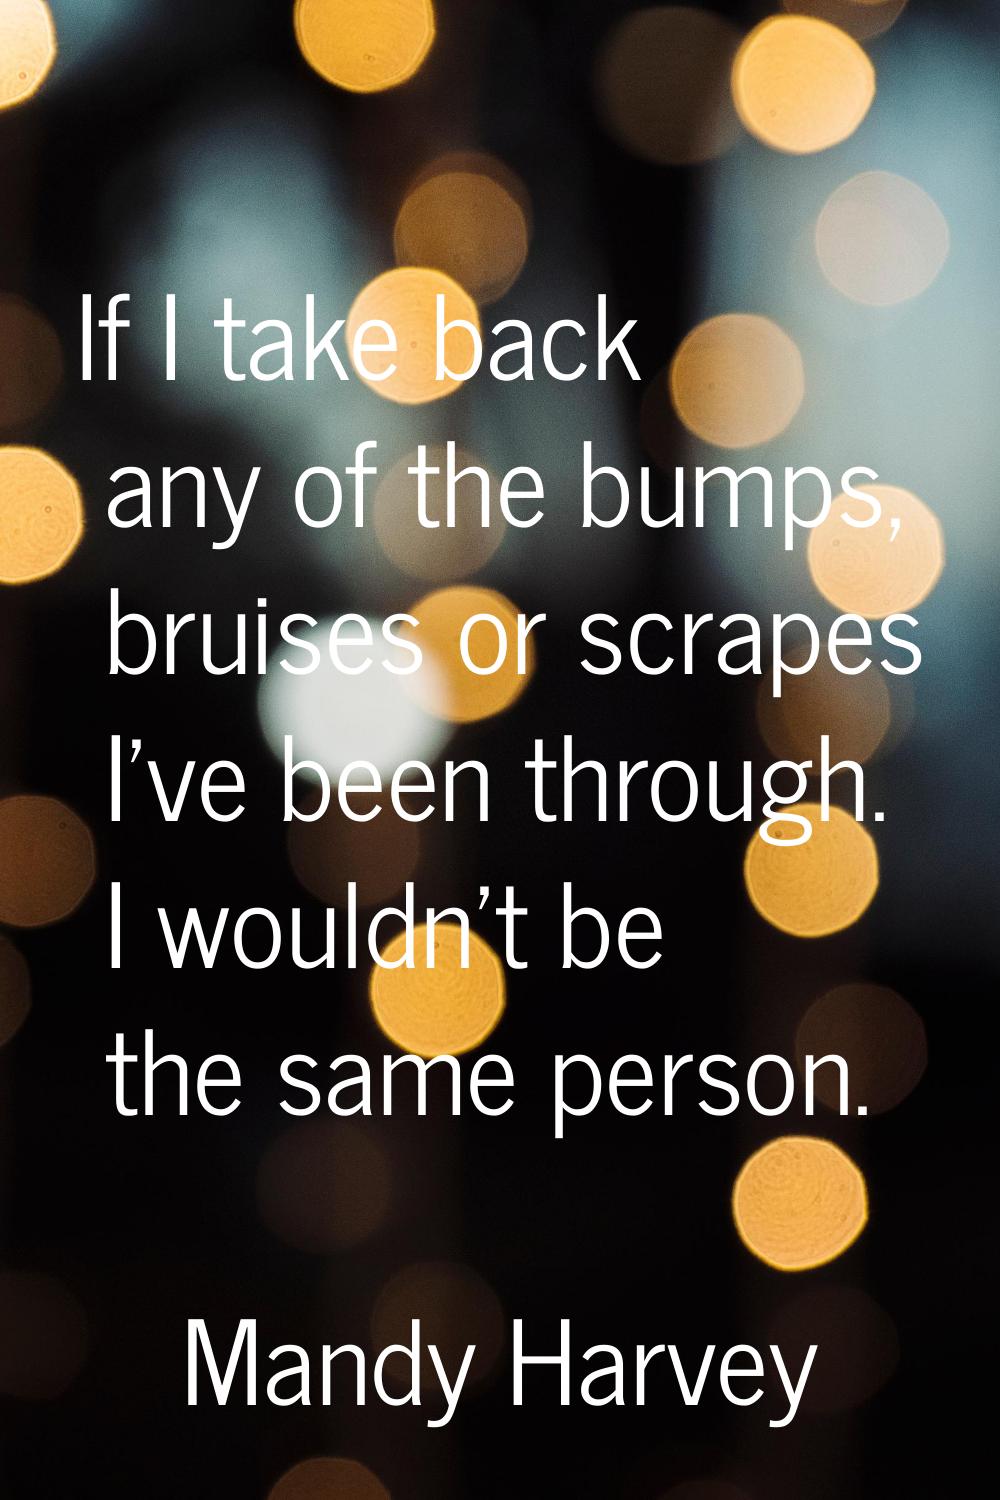 If I take back any of the bumps, bruises or scrapes I’ve been through. I wouldn’t be the same perso